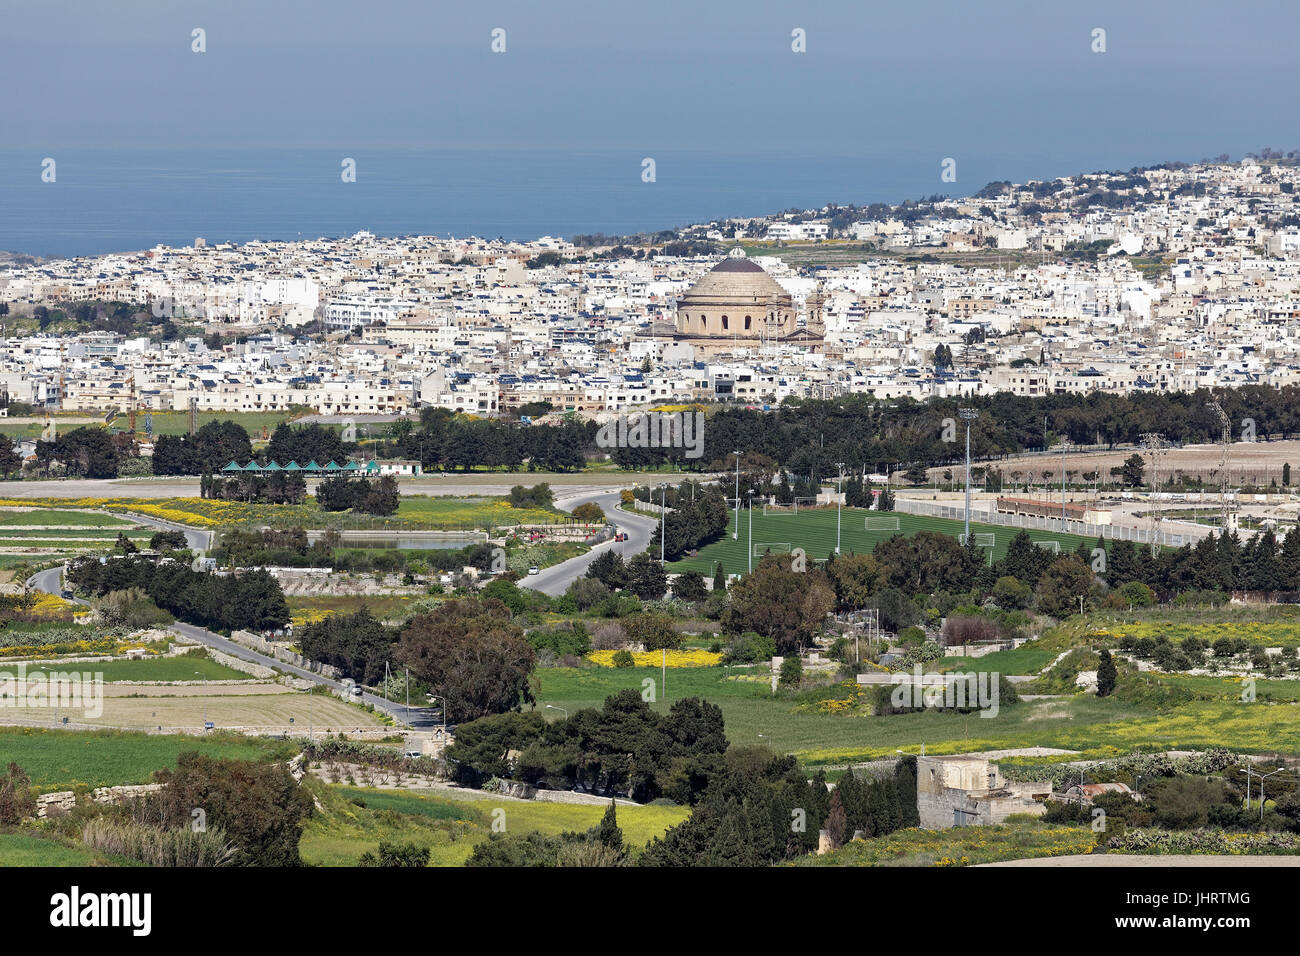 View of the town with Rotunda of Mosta, monumental dome church, Mosta, Malta Stock Photo